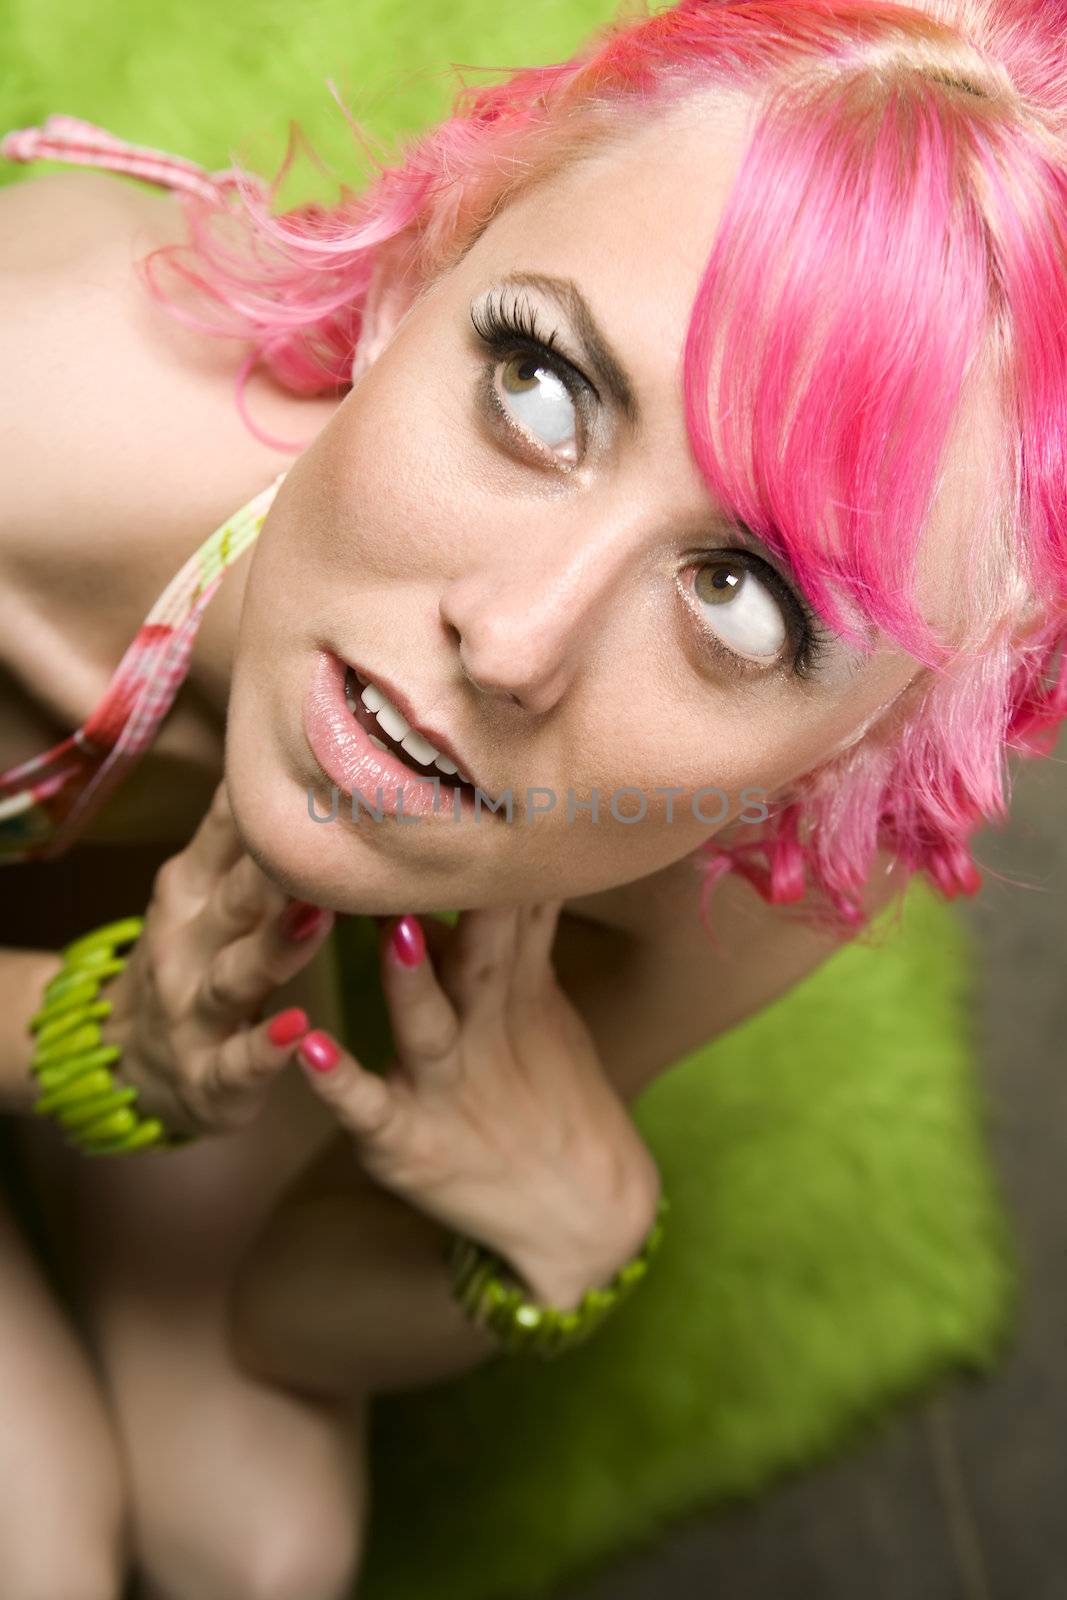 Closeup of Pretty Woman with Pink Hair on Green Rug